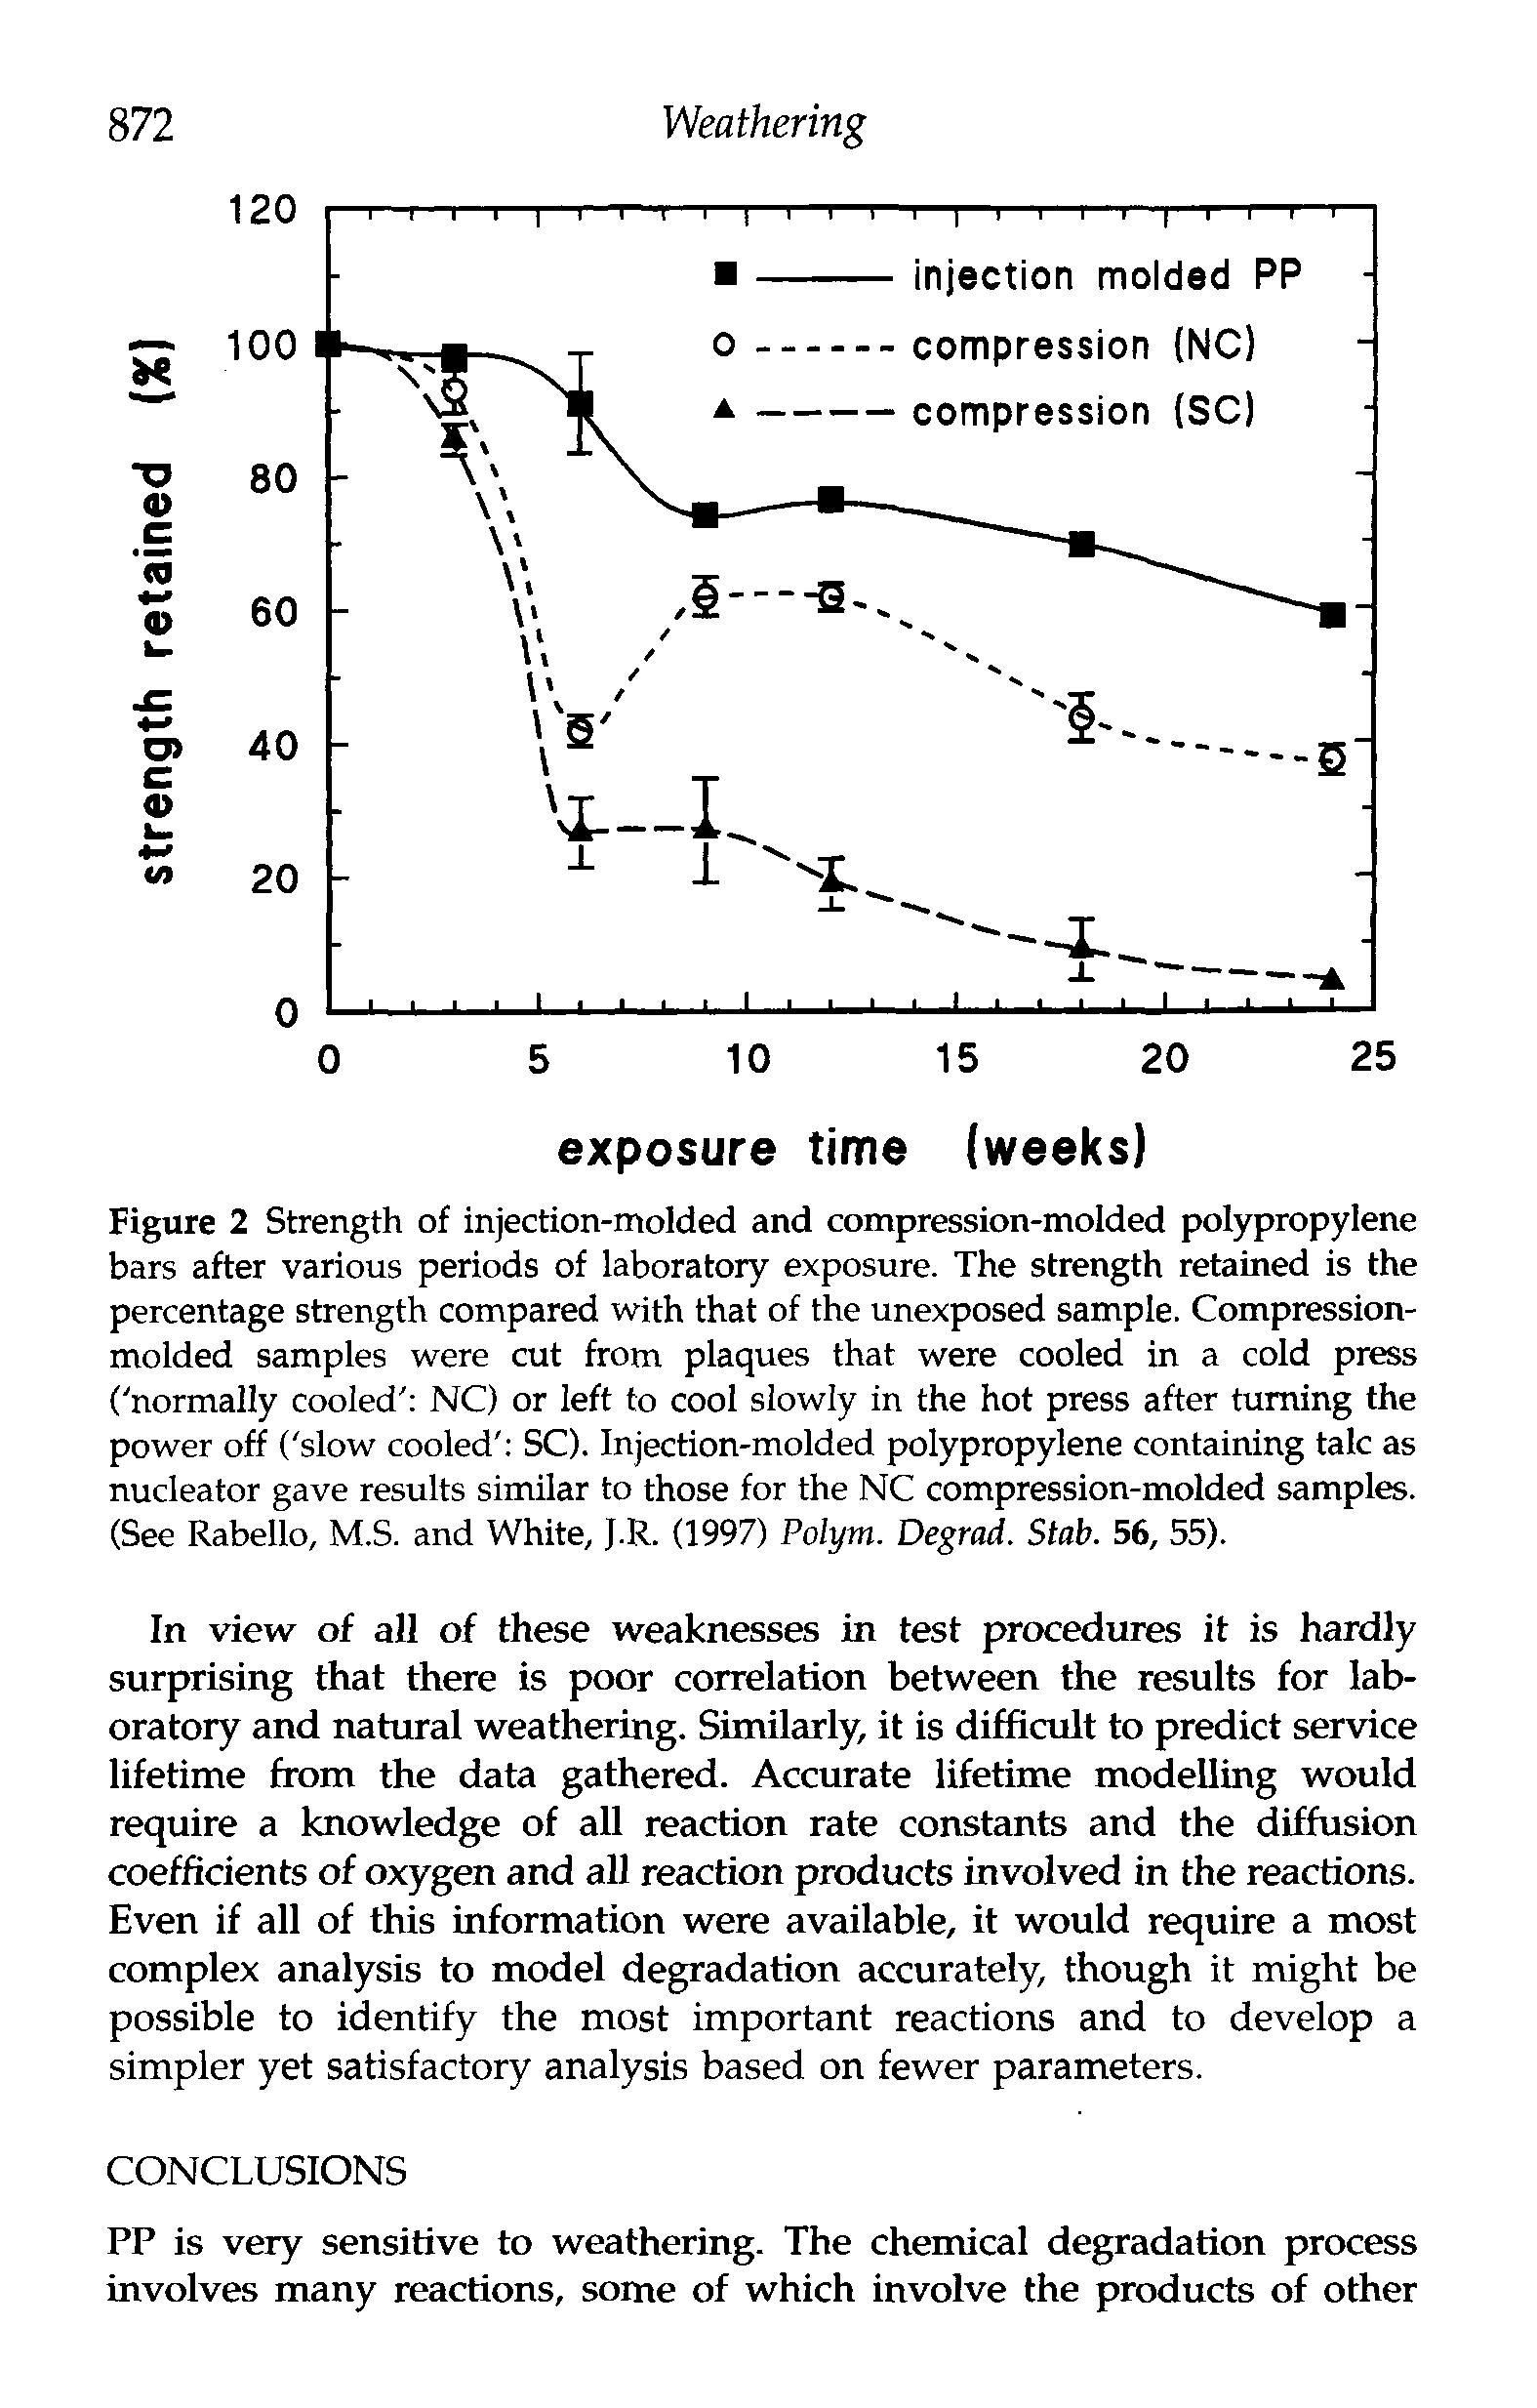 Figure 2 Strength of injection-molded and compression-molded polypropylene bars after various periods of laboratory exposure. The strength retained is the percentage strength compared with that of the unexposed sample. Compression-molded samples were cut from plaques that were cooled in a cold press ( normally cooled NC) or left to cool slowly in the hot press after turning the power off ( slow cooled SC). Injection-molded polypropylene containing talc as nucleator gave results similar to those for the NC compression-molded samples. (See Rabello, M.S. and White, J.R. (1997) Polym. Degrad. Stab. 56, 55).